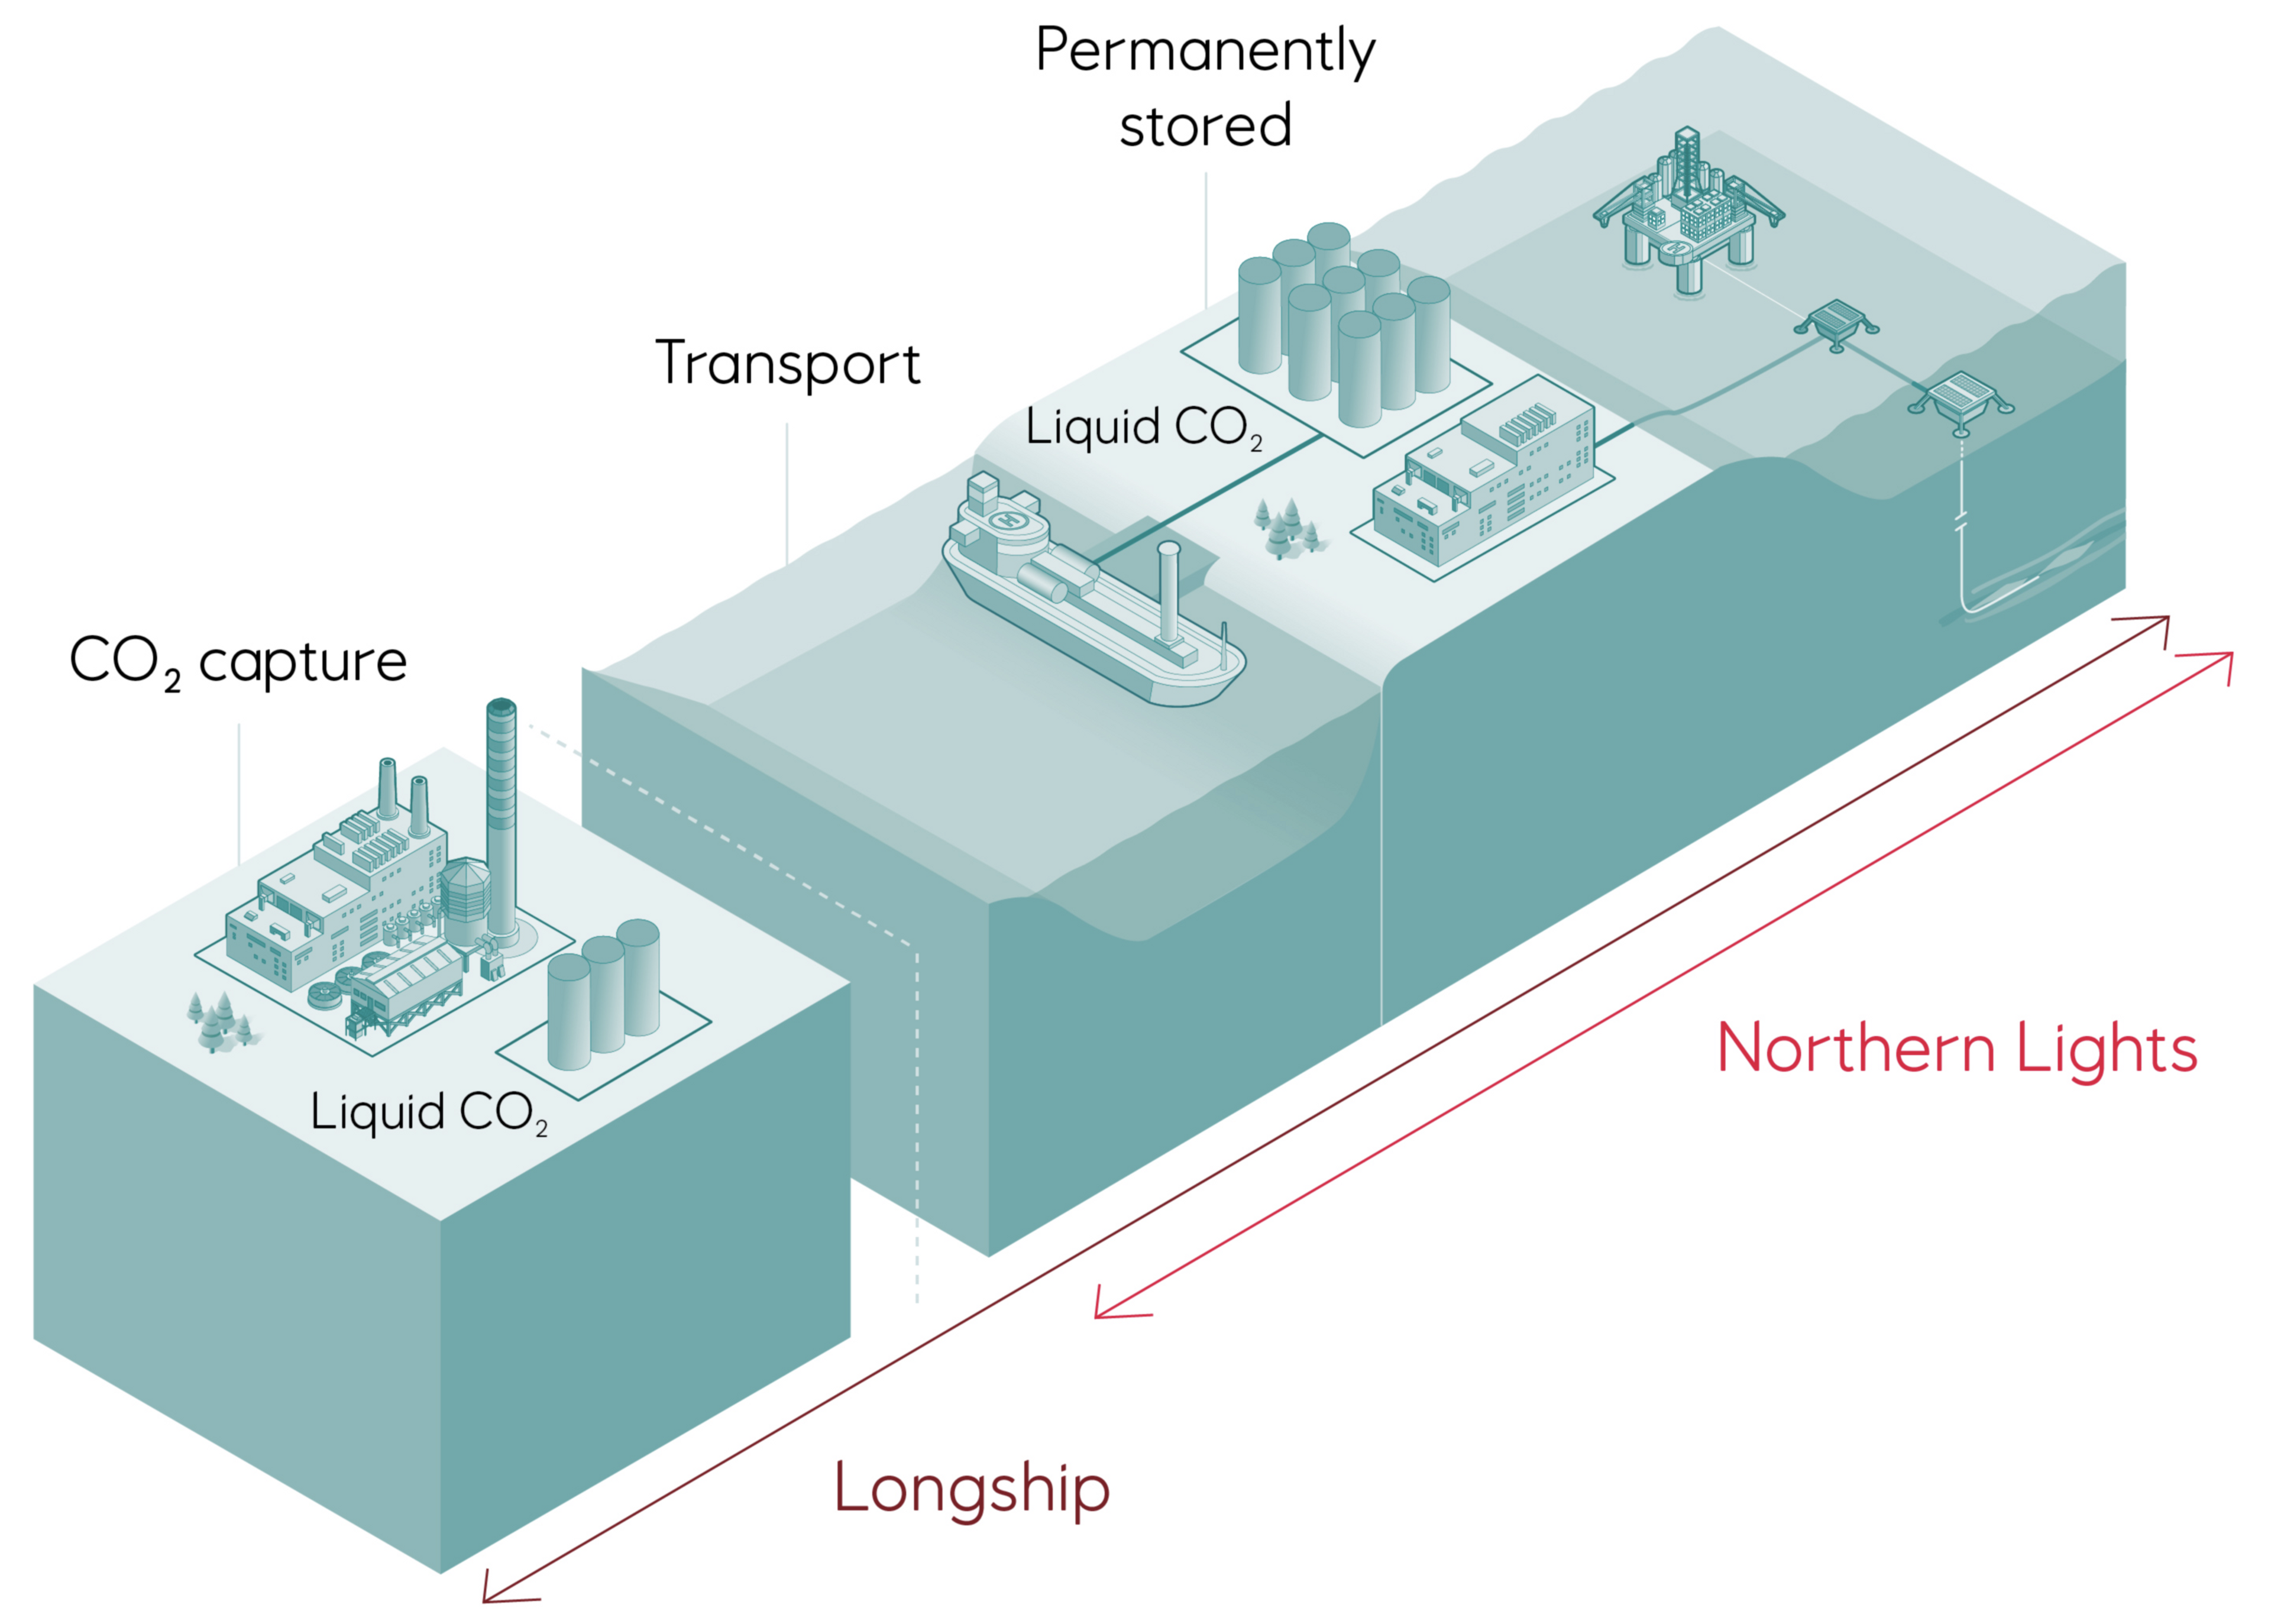 Illustration of CO2 capture, transport and storage phases